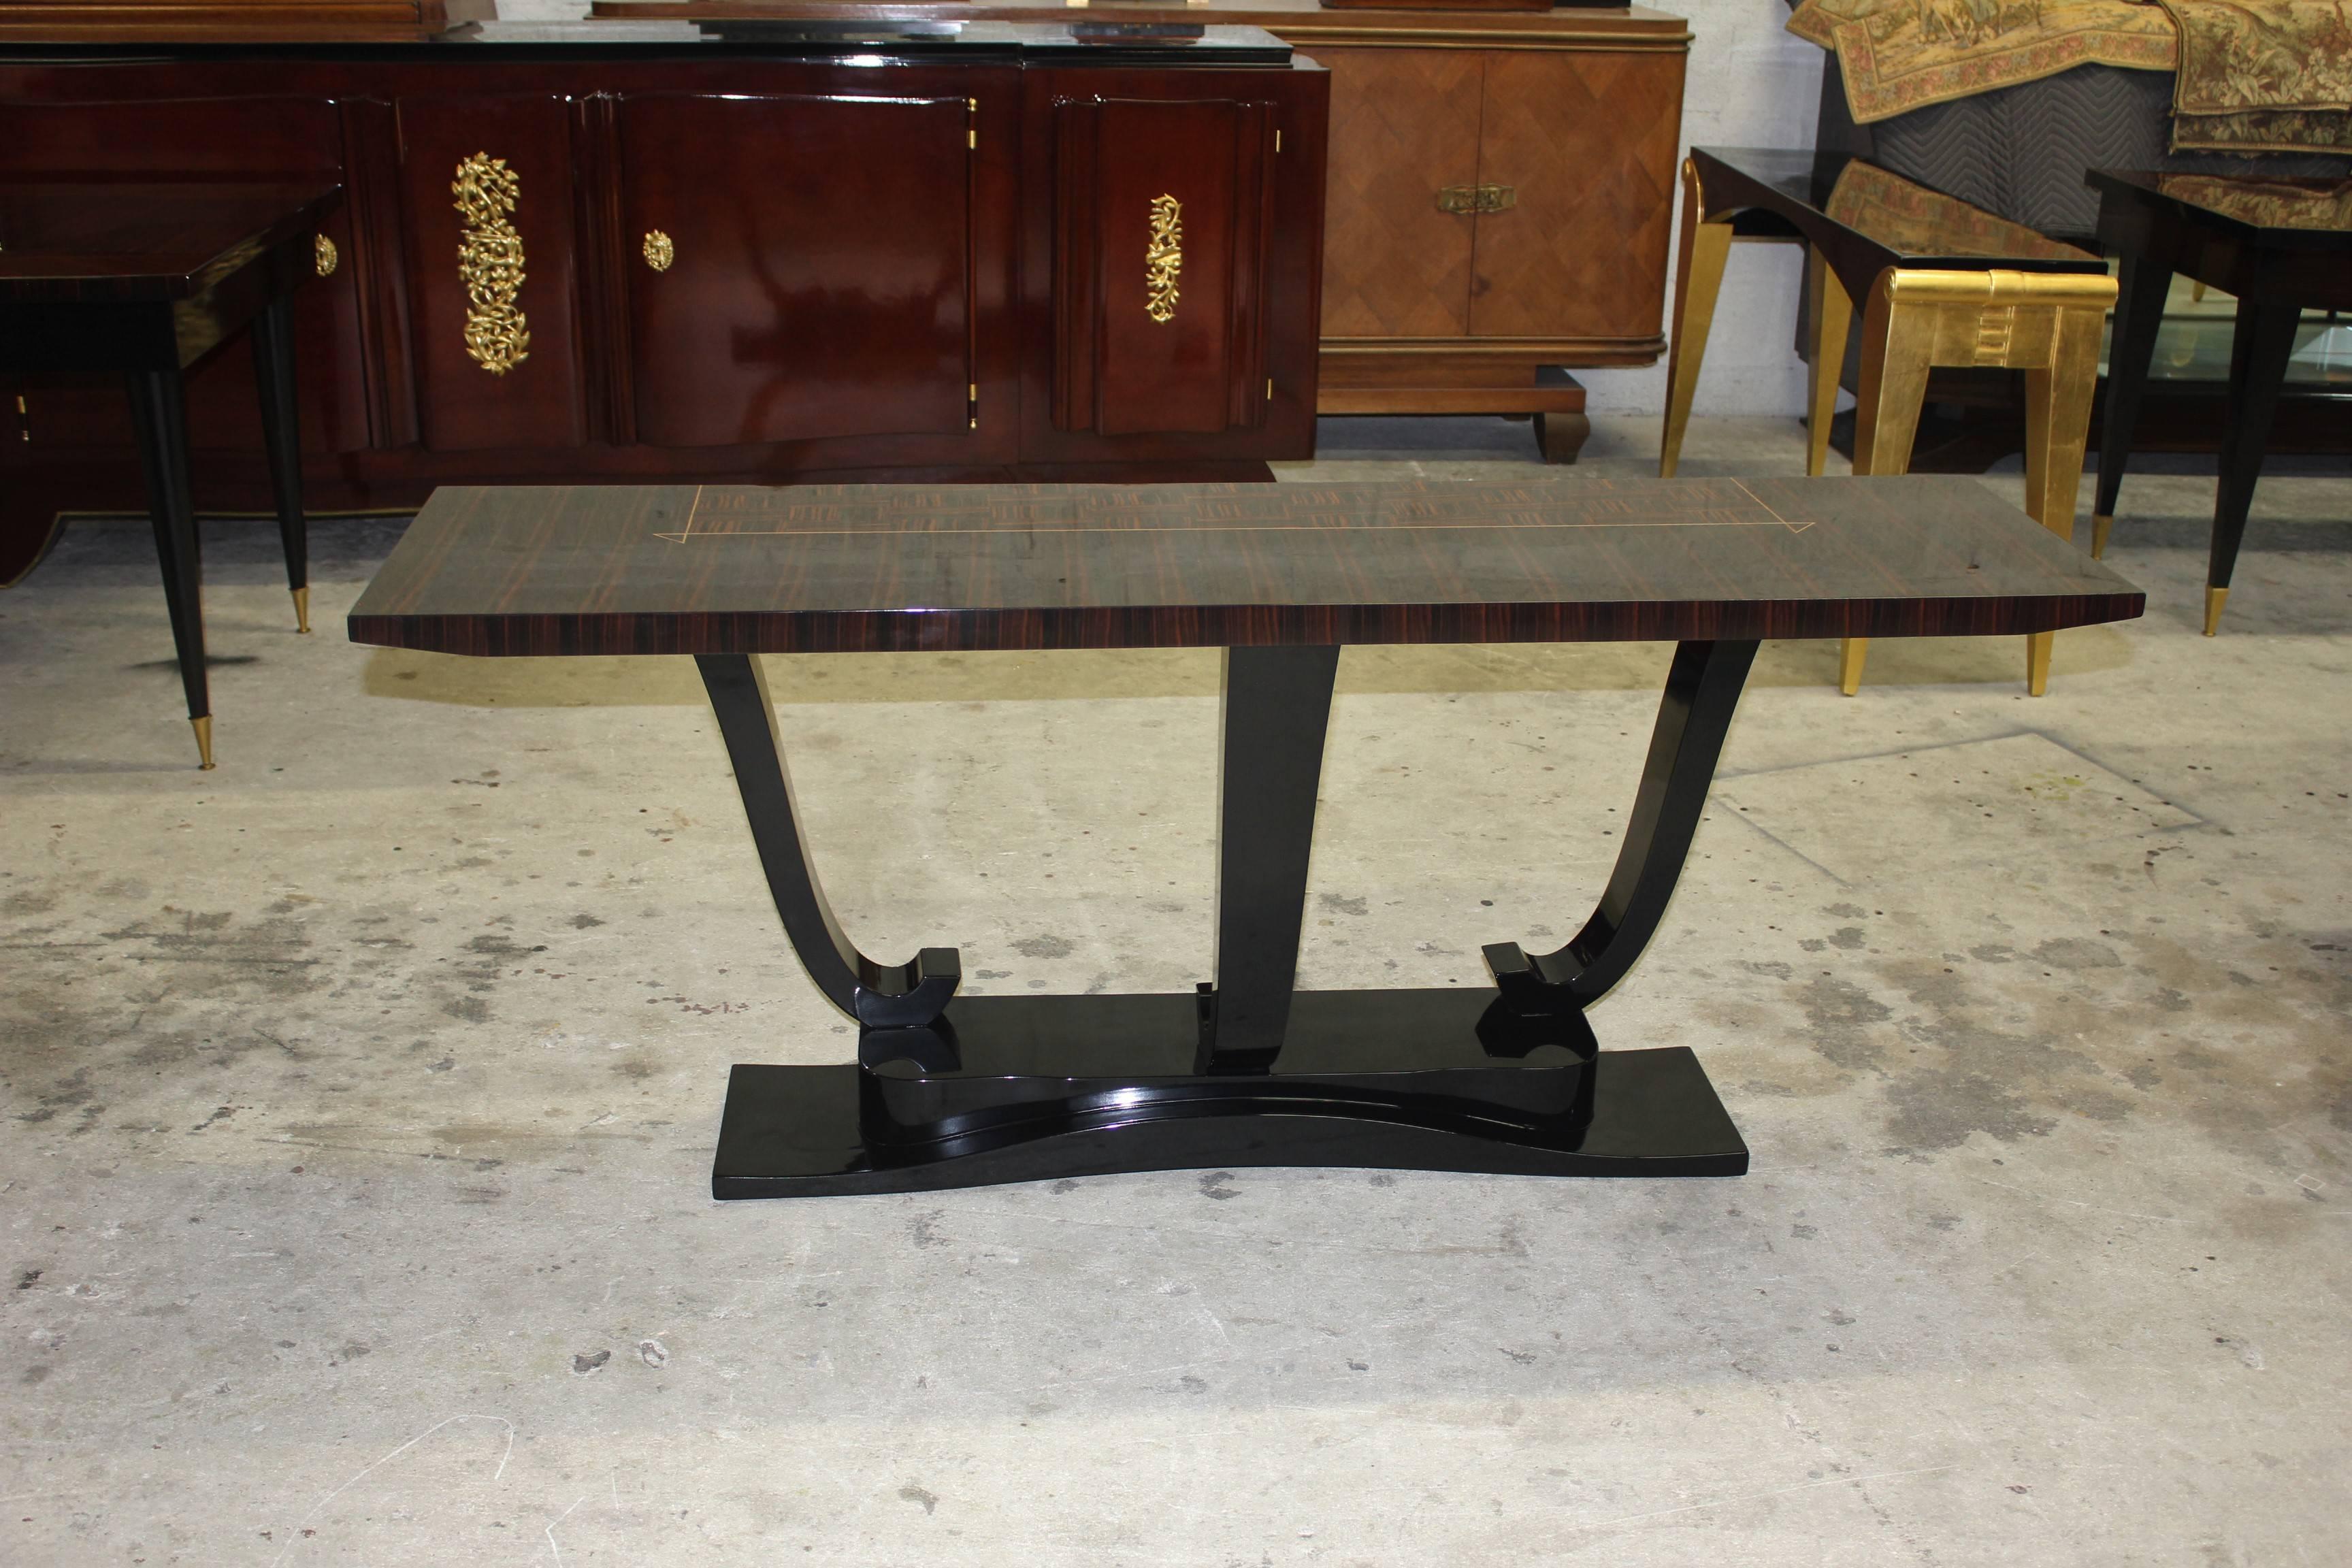 A French Art Deco exotic Macassar ebony console table, circa 1940s. The console table are in perfect condition, three legs ebony ,Macassar ebony top with center inlay parquetry Macassar, beautifully detailed, three legs, steeped base. Please note